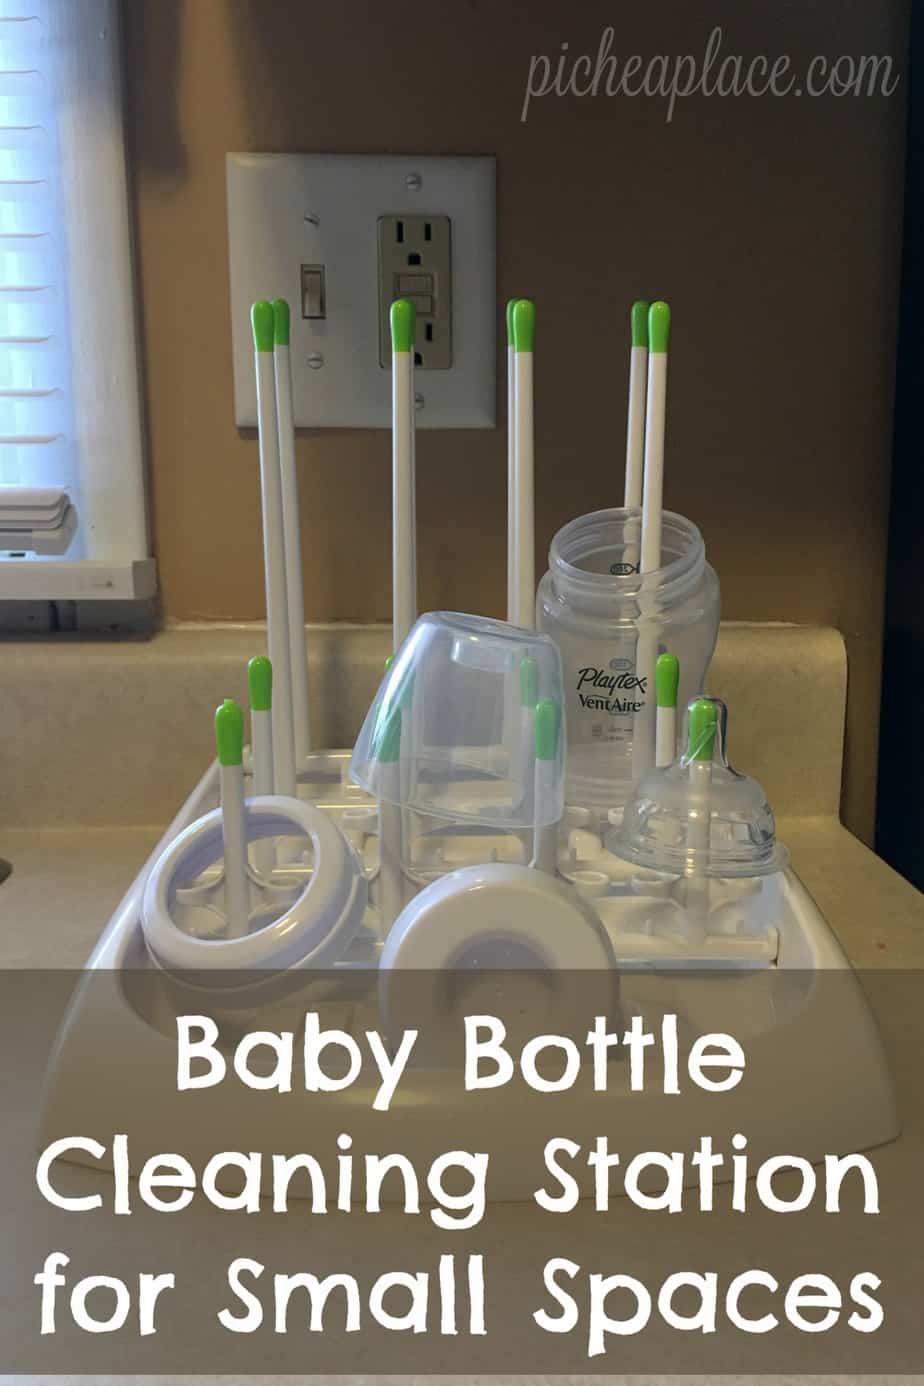 When you bring home a new baby to a home that is already limited on space, you need space saving solutions for all the baby stuff. This was the case for us as we brought home our fourth child and needed a baby bottle cleaning station for small spaces.